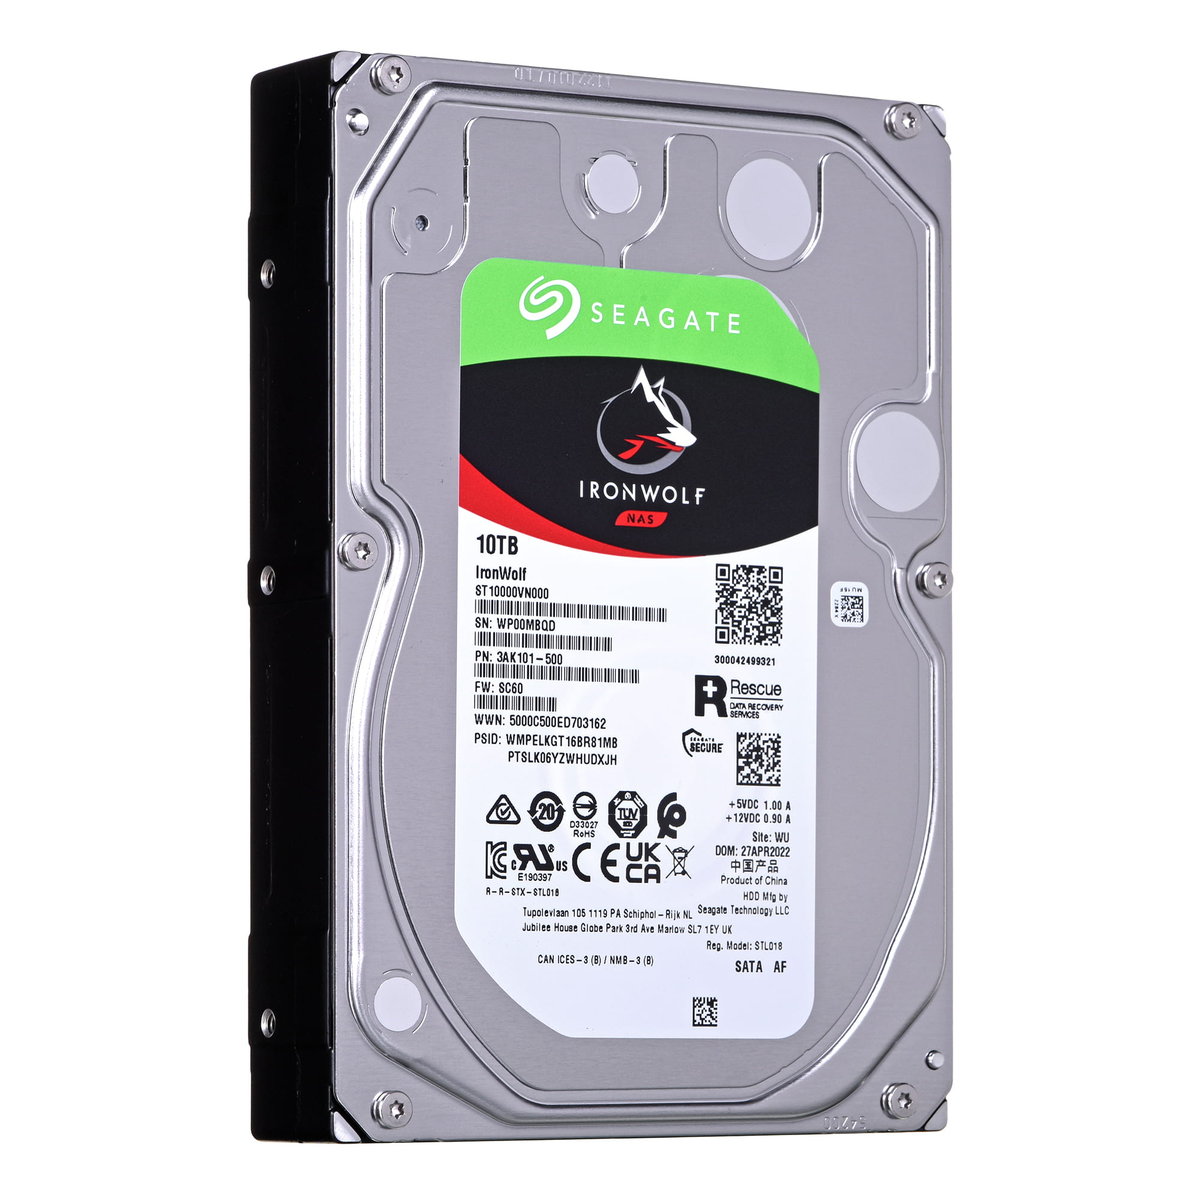 Seagate Ironwolf NAS HDD 10TB 7200rpm 6Gb/s SATA 256MB cache 89cm 3.5inch 24x7 CMR for NAS and RAID Rackmount Systems BLK